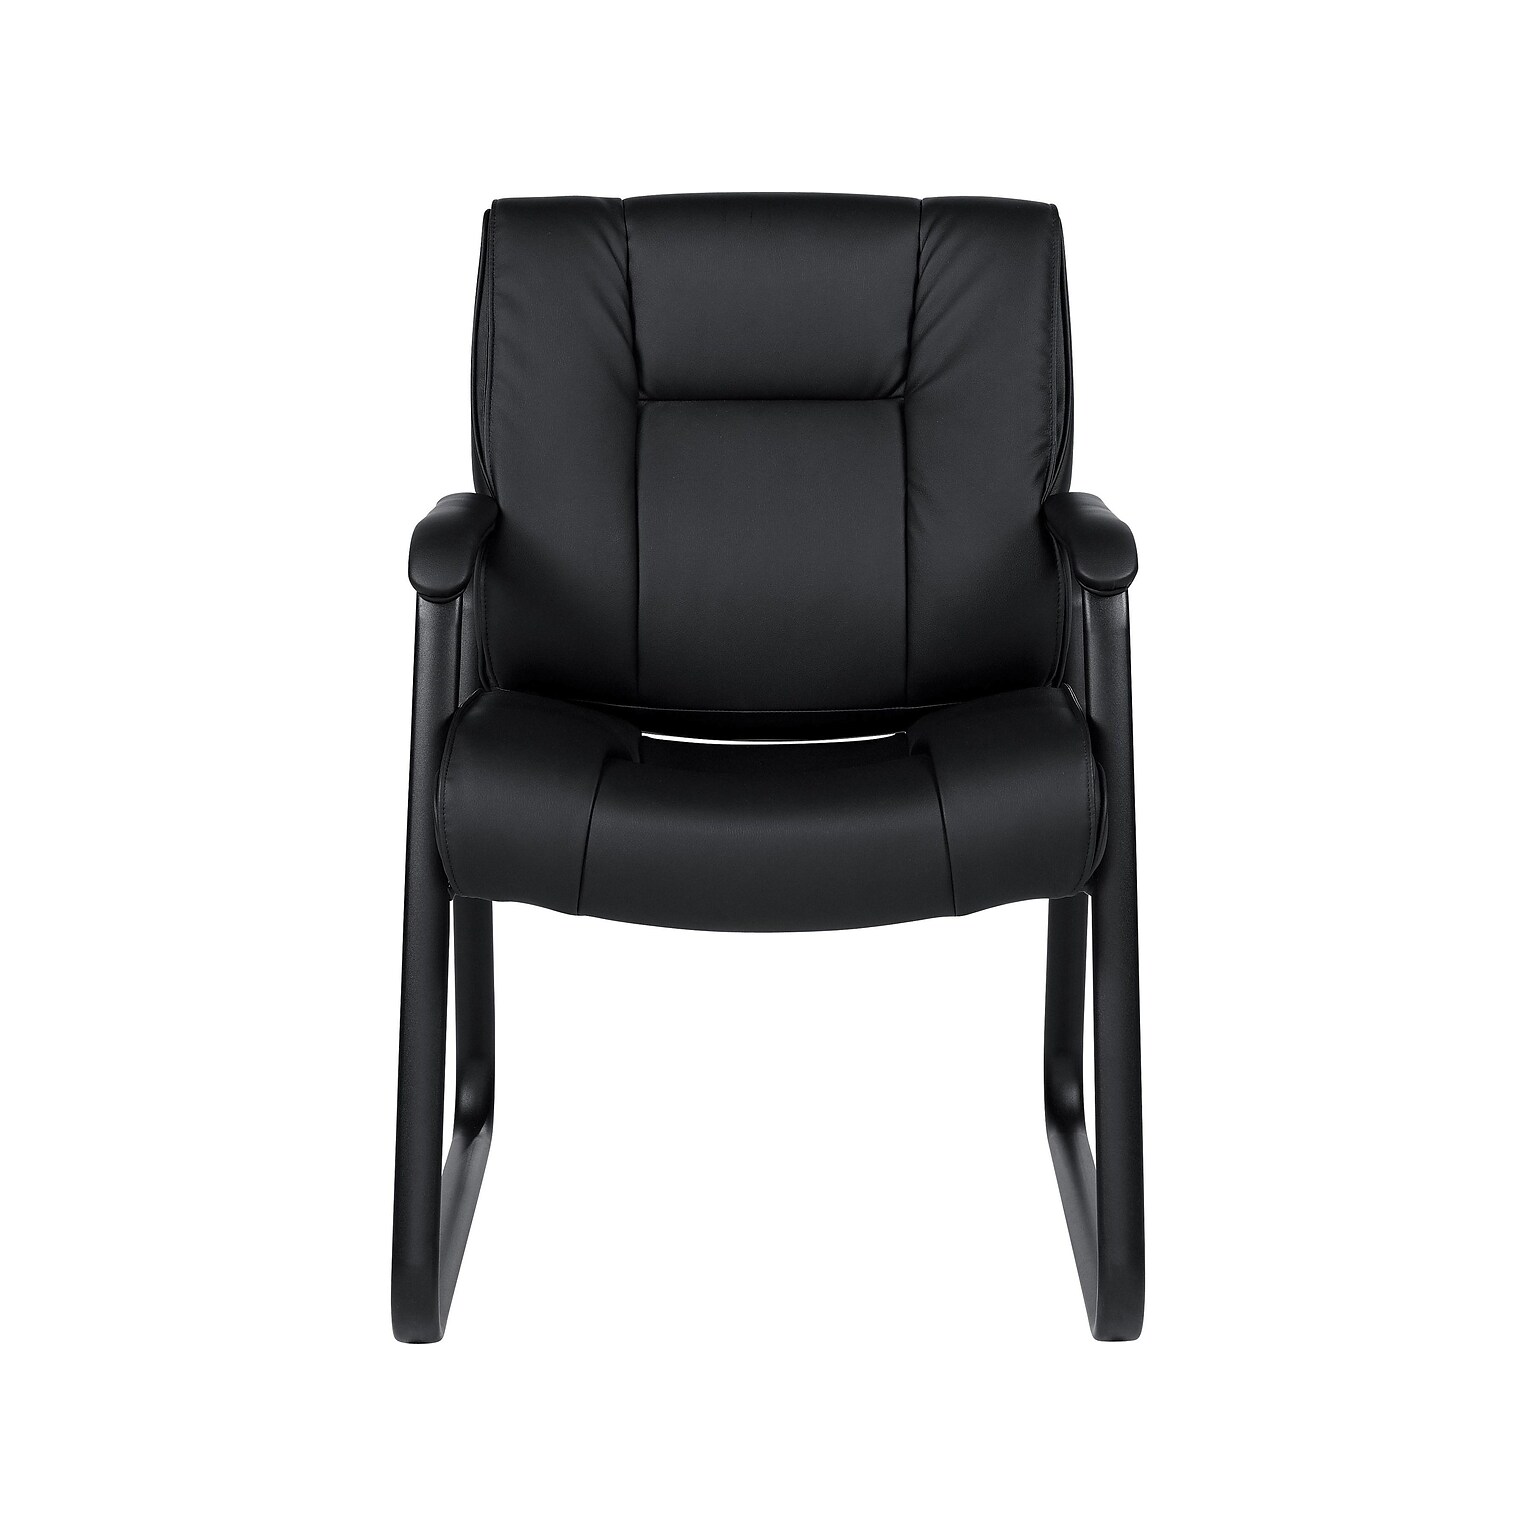 Offices to Go Luxhide Guest Chair, Black (OTG2782)